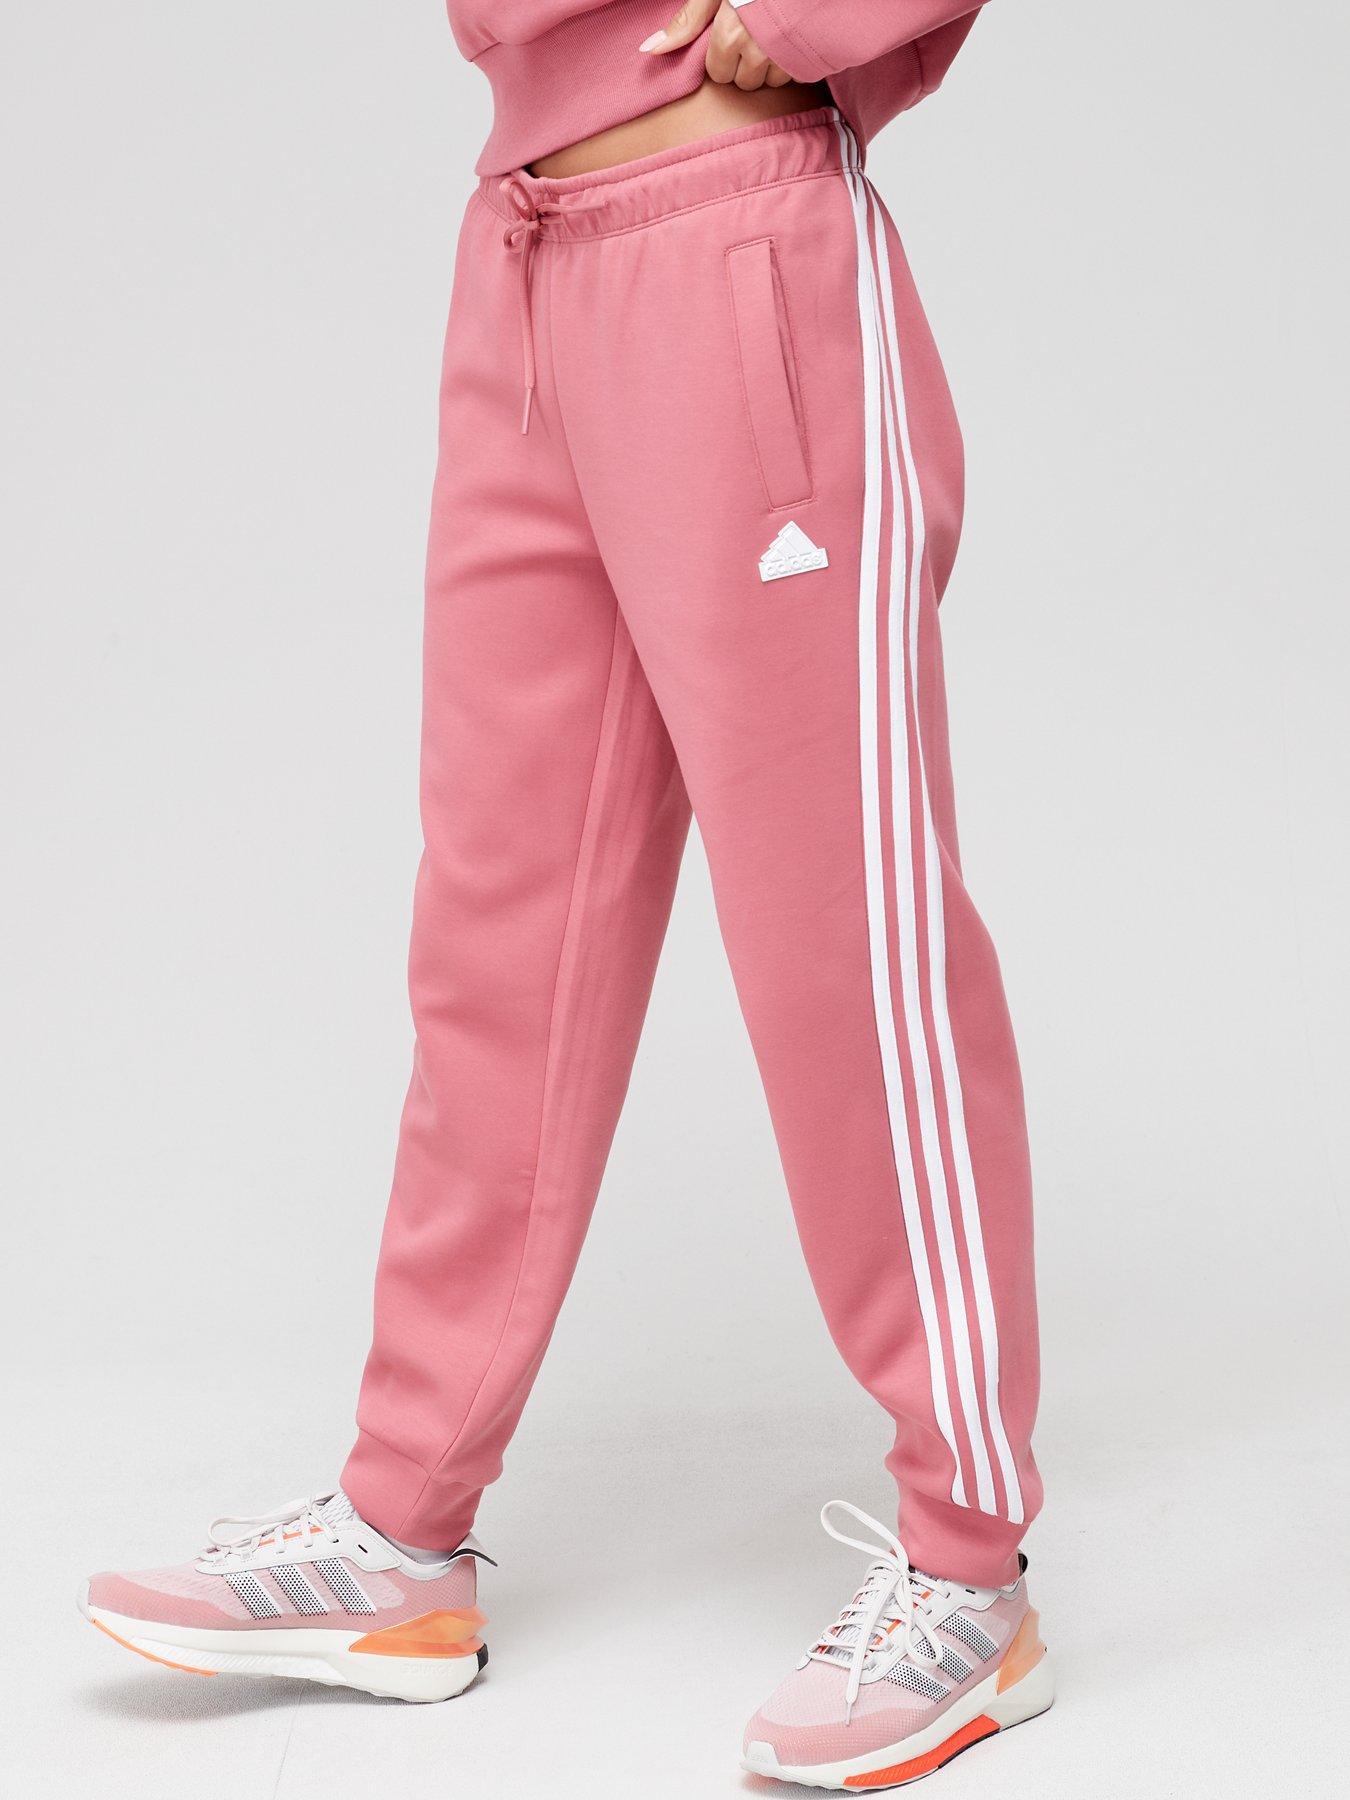 zweep Savant Productief Pink | Adidas | Jogging bottoms | Womens sports clothing | Sports & leisure  | www.very.co.uk